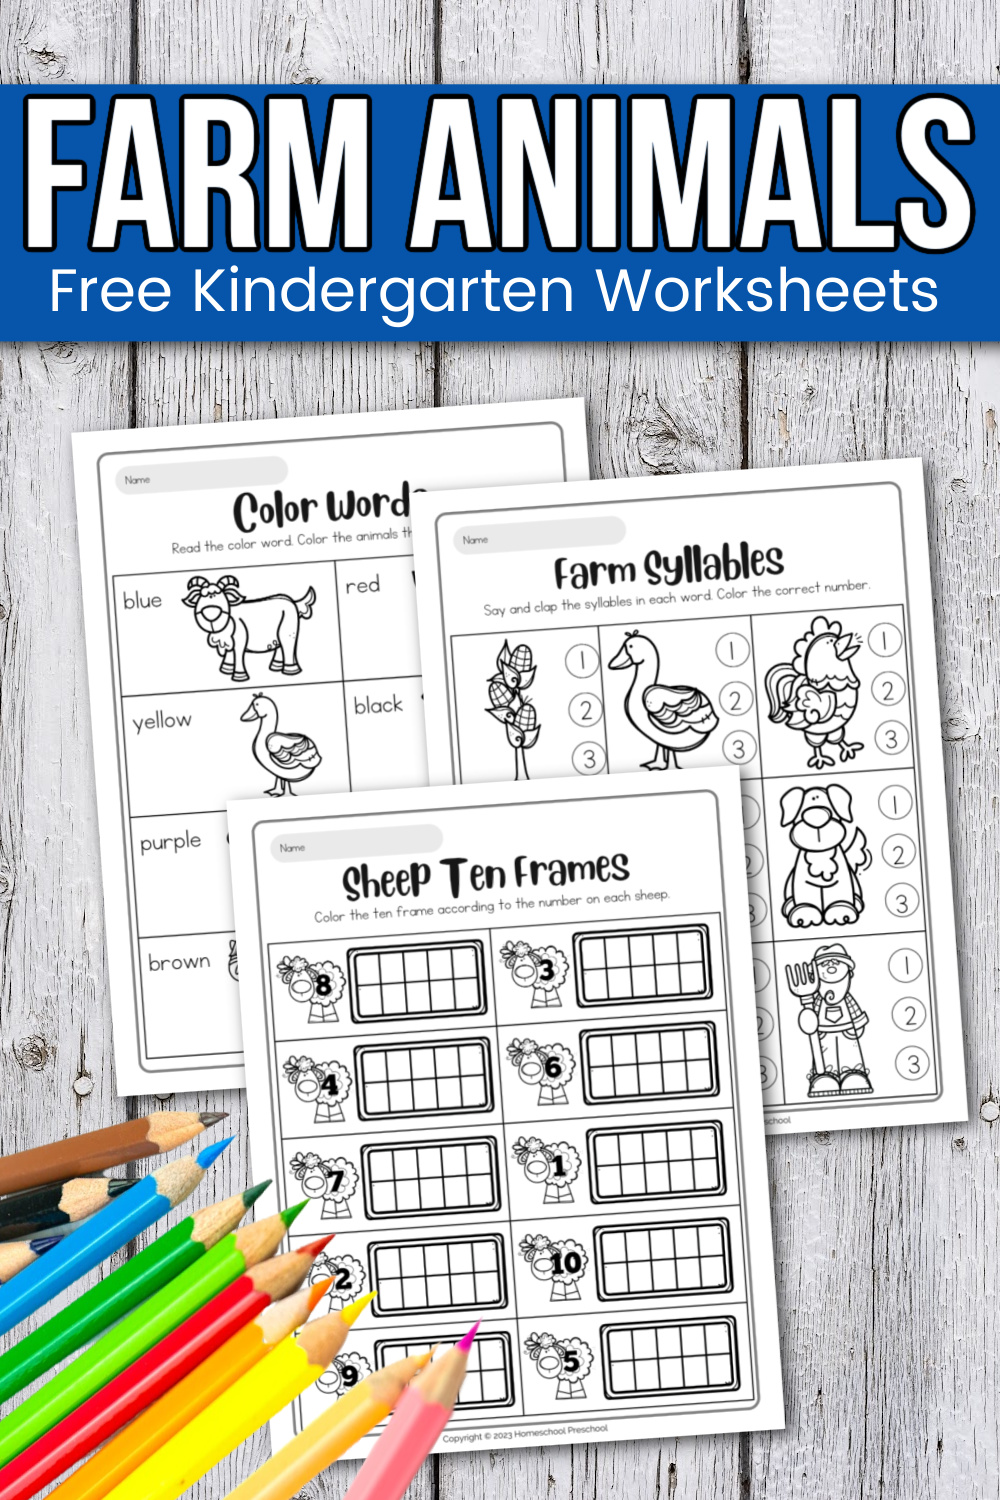 free-animals-coloring-pages-pdf Printable Farm Animal Worksheets for Kindergarten